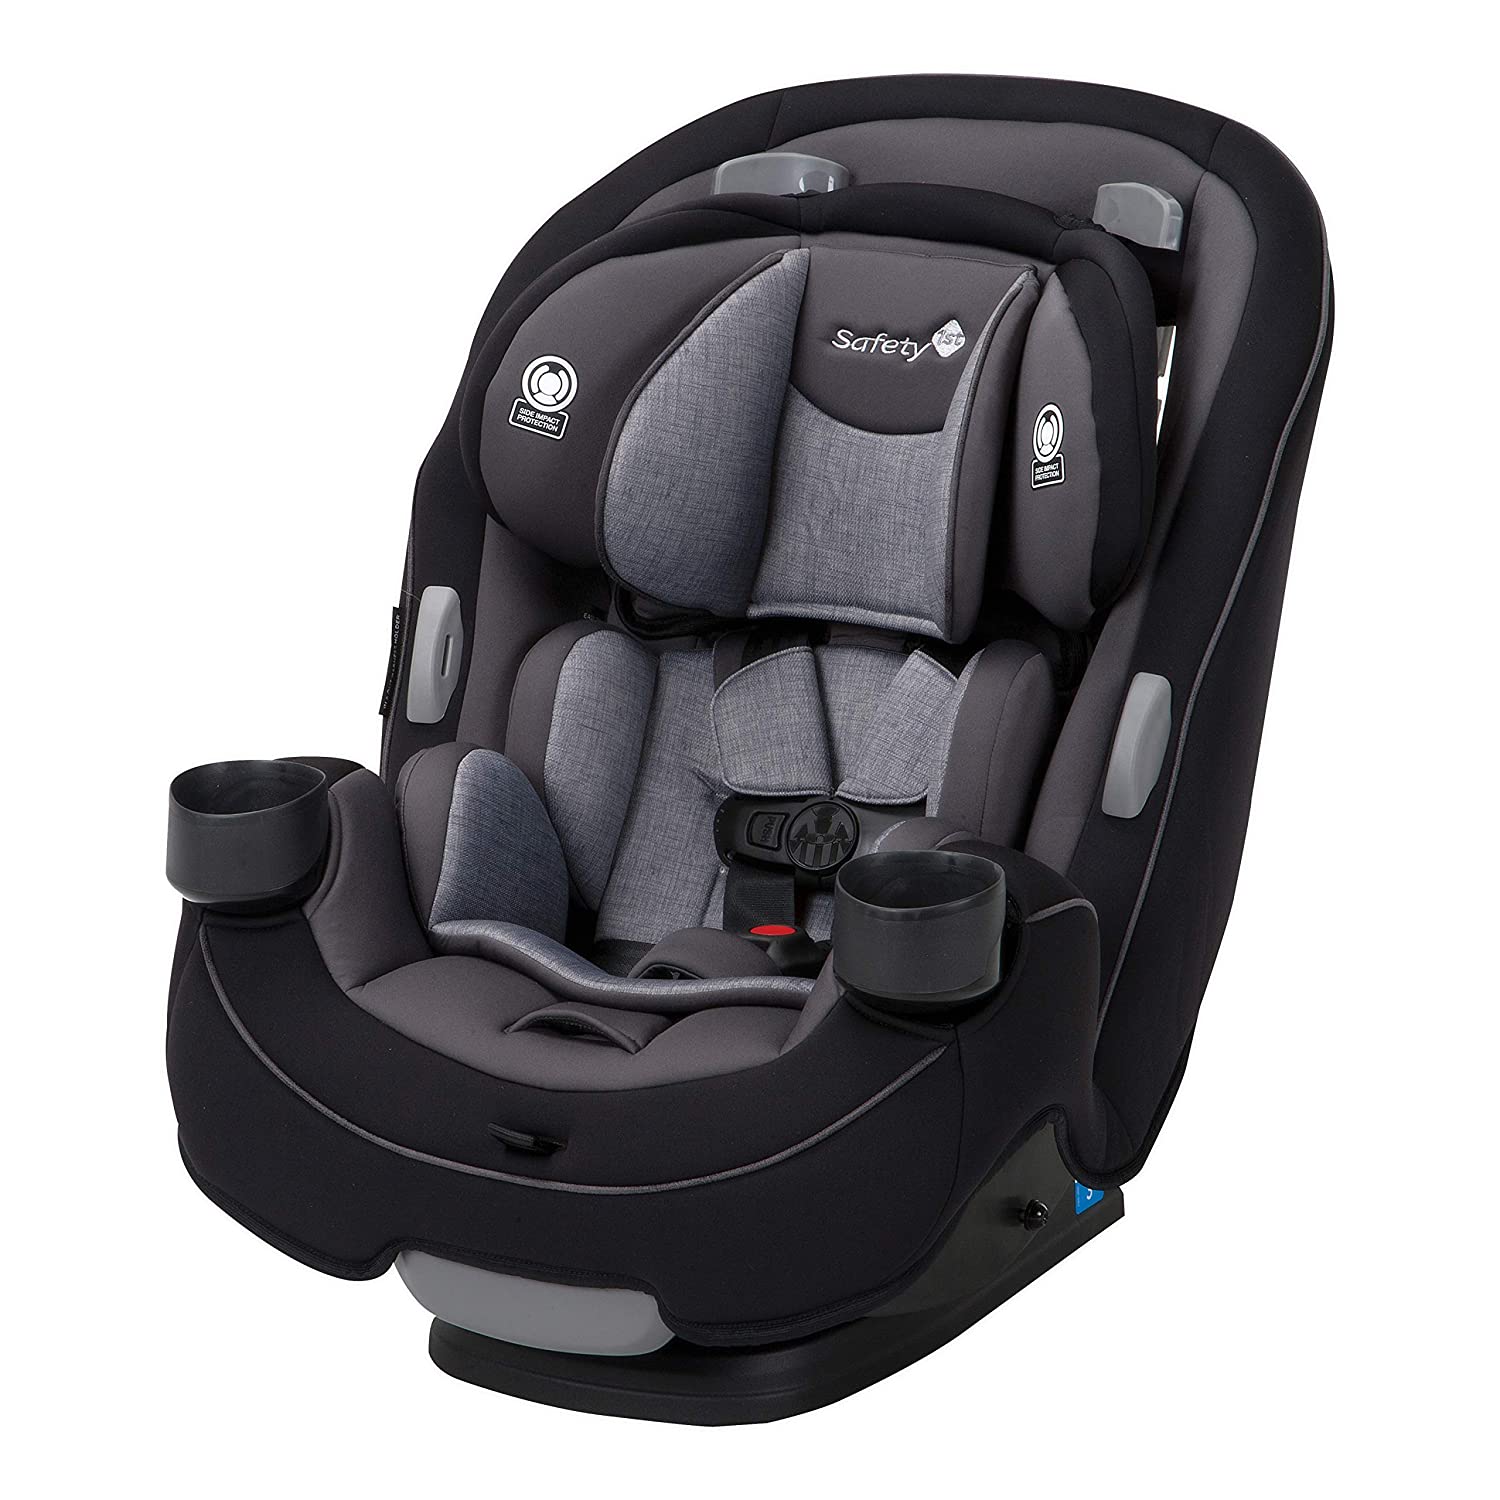 Top 5 Best Affordable Convertible Car Seats Reviews in 2022 3